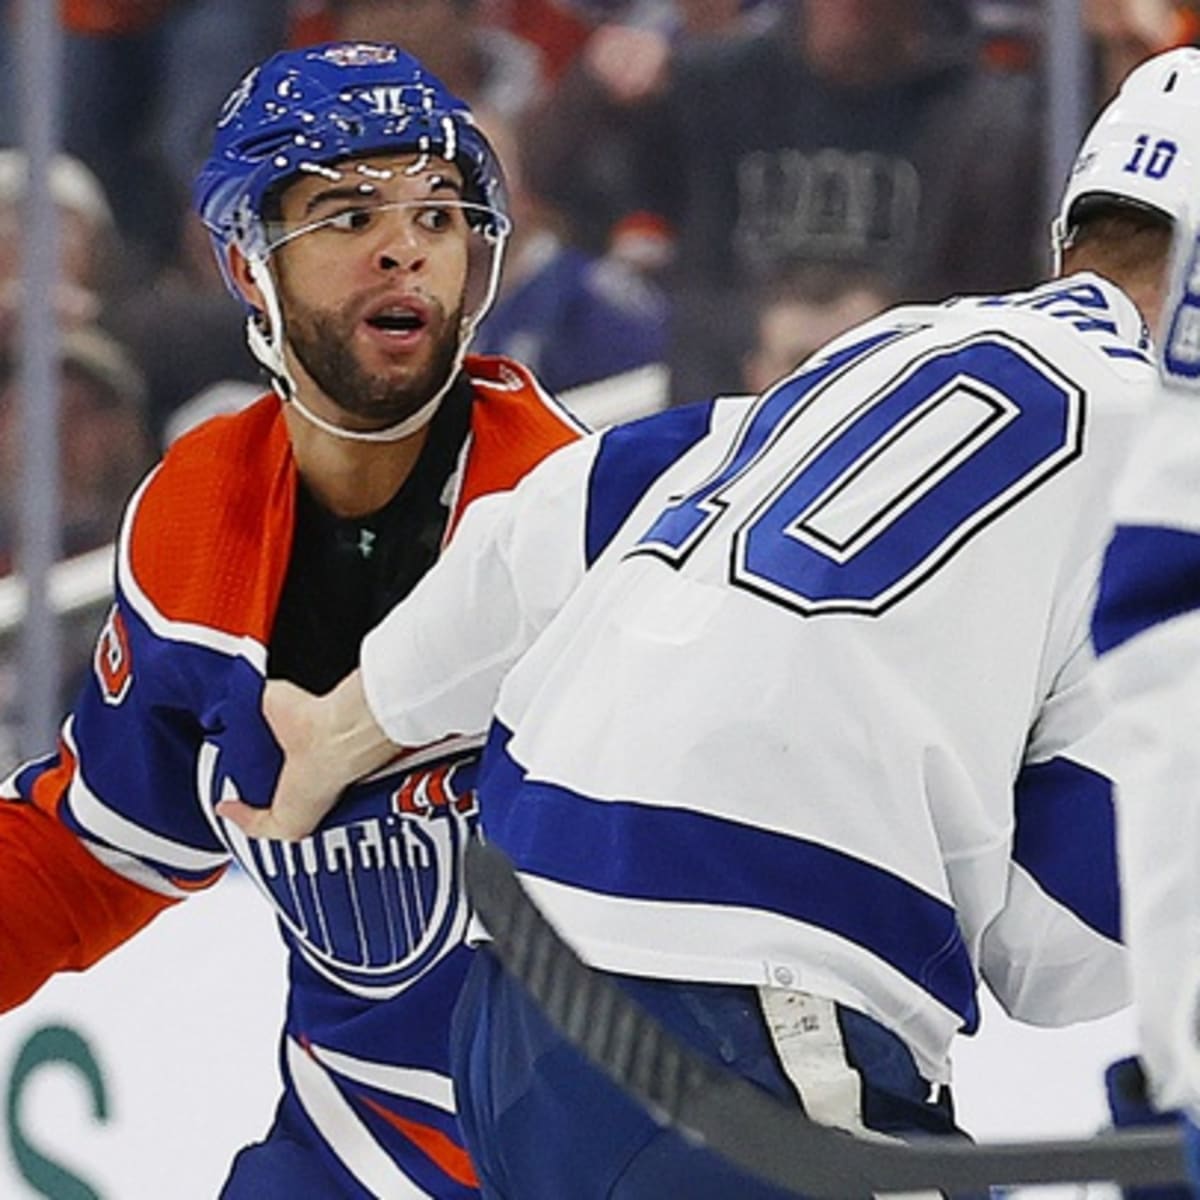 PHN's Best Shots of the Game: Oilers top Kansas City in return to